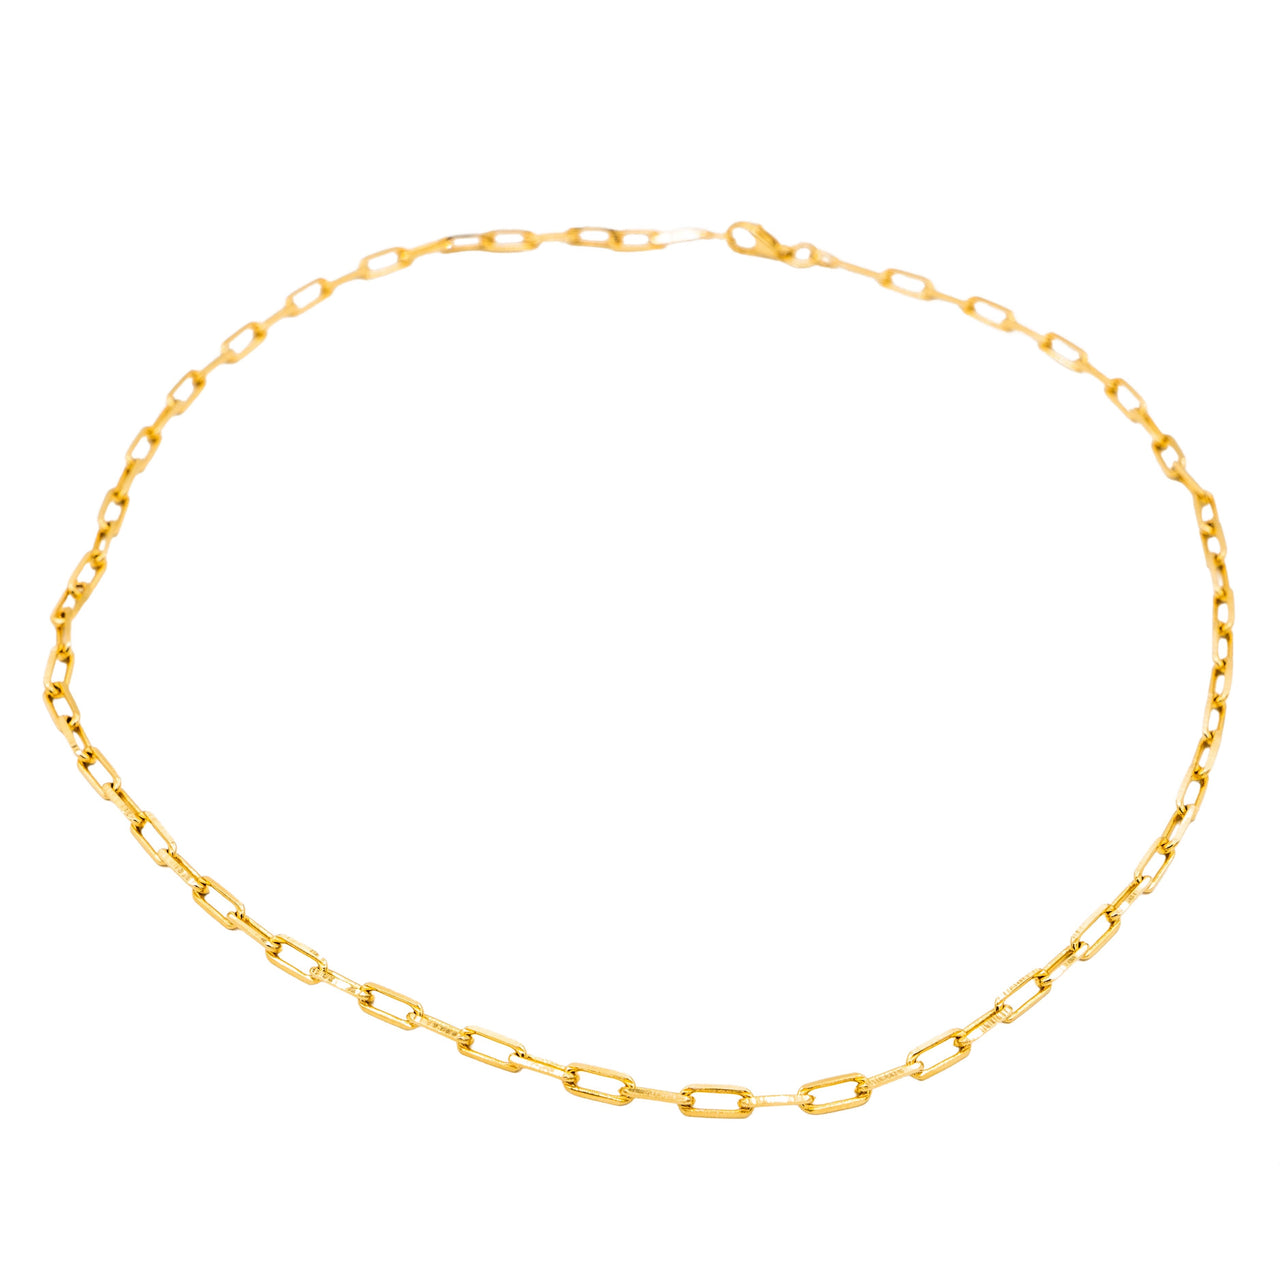 The 18K Gold-Filled Chain-Link Necklace